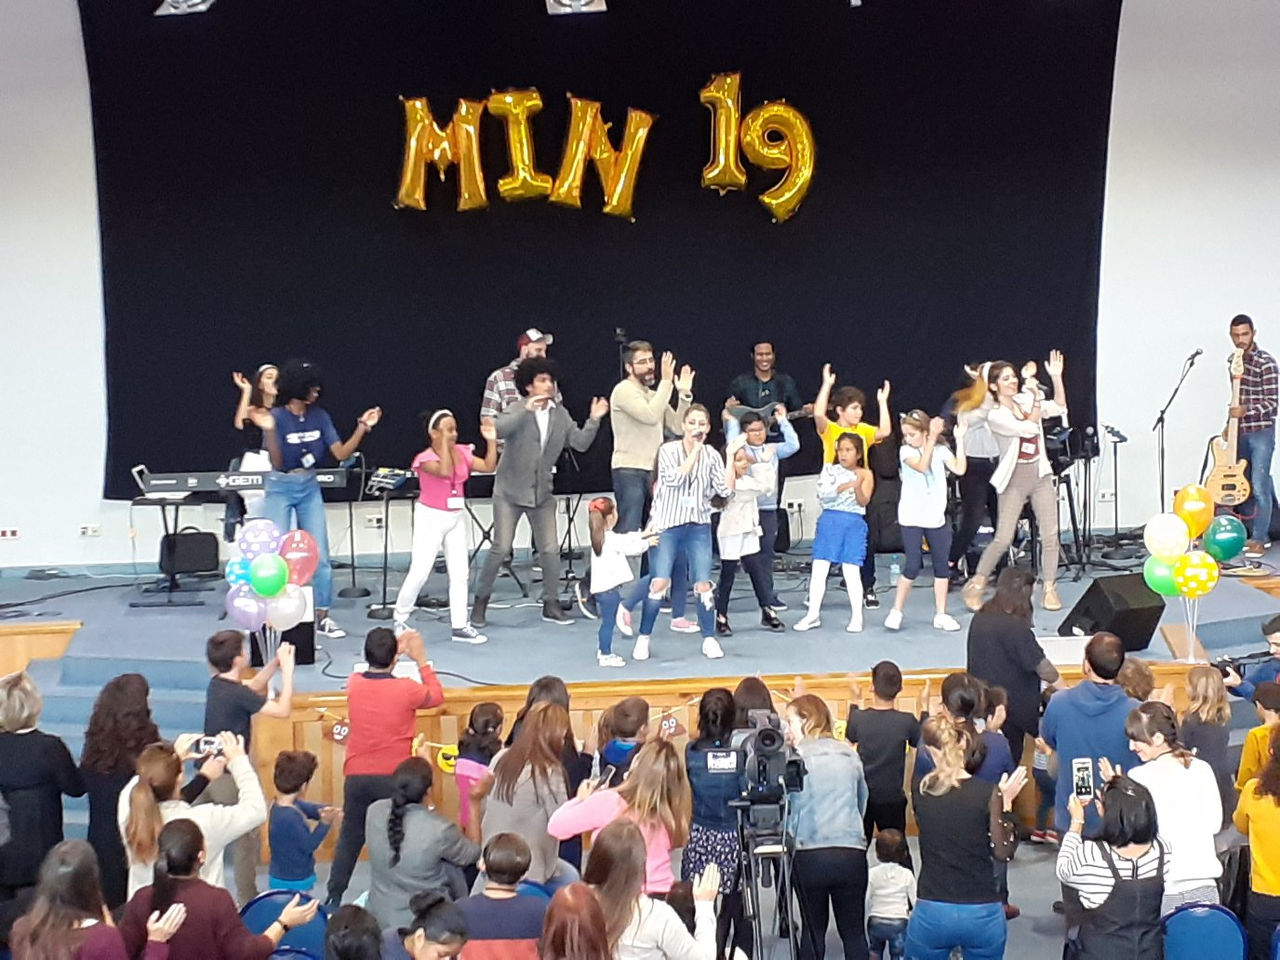 A National Movement for Family Ministry in Spain